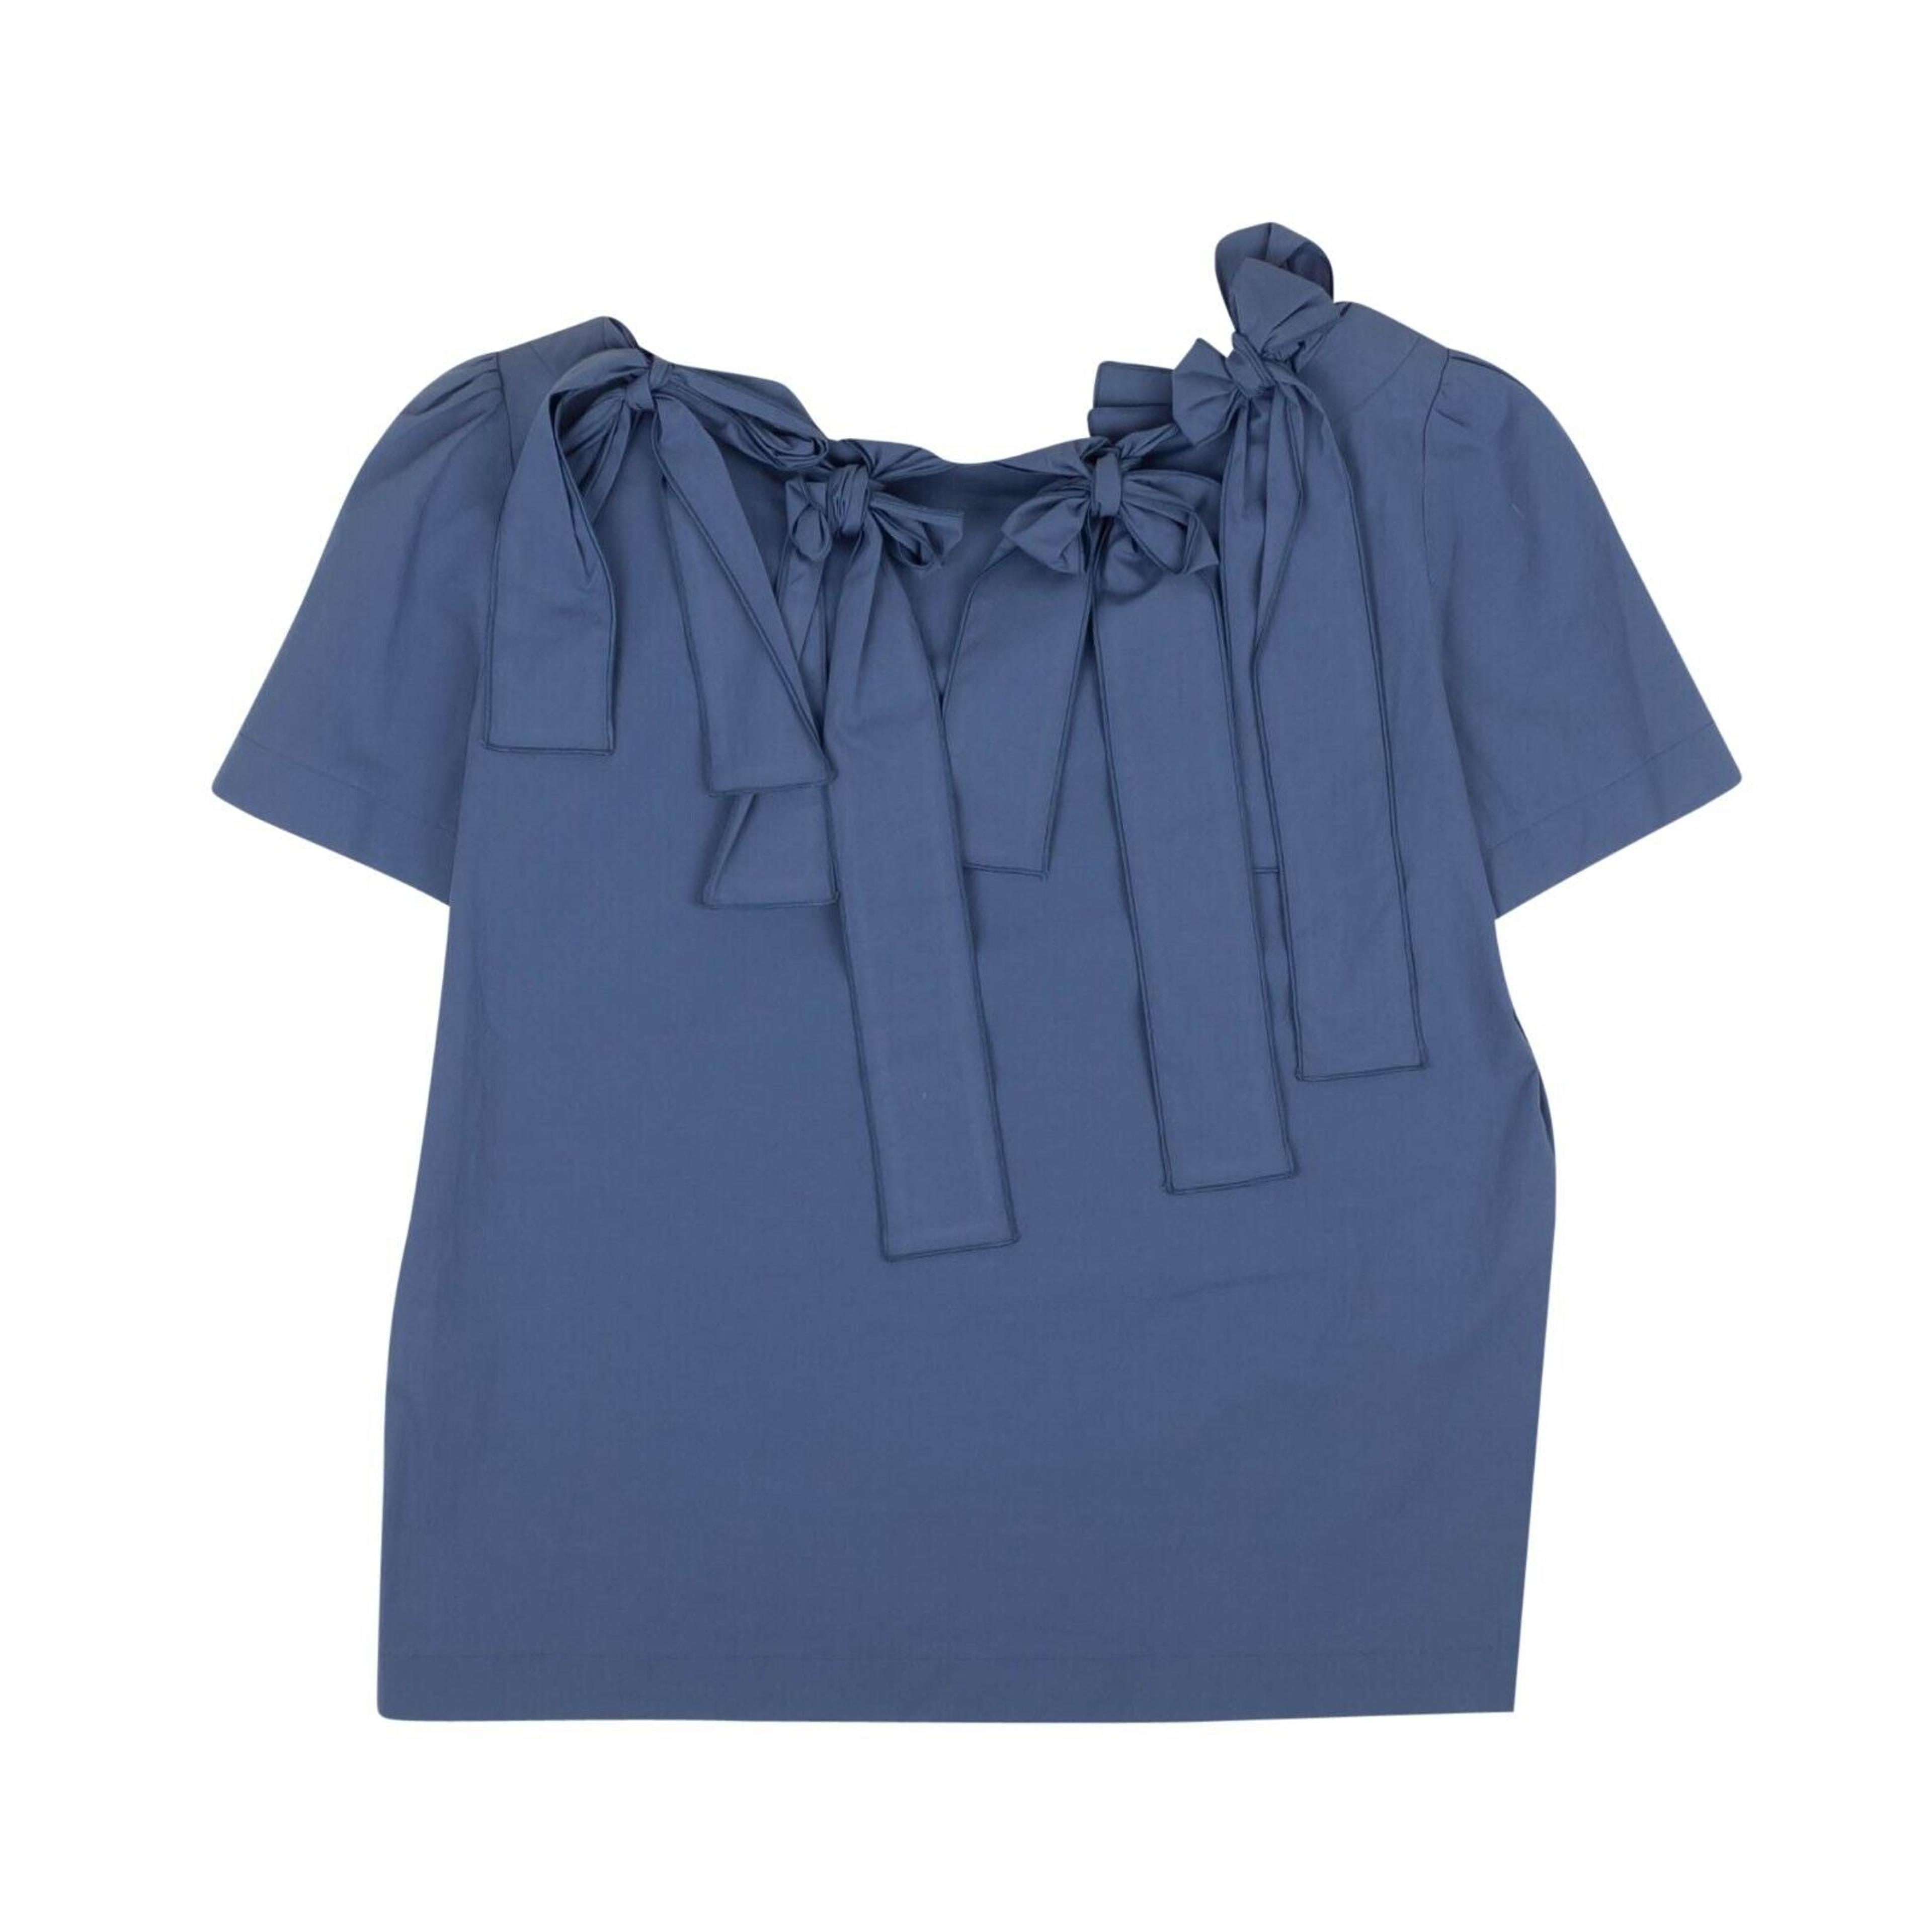 Alternate View 1 of Blue Bow Accented Short Sleeve Blouse